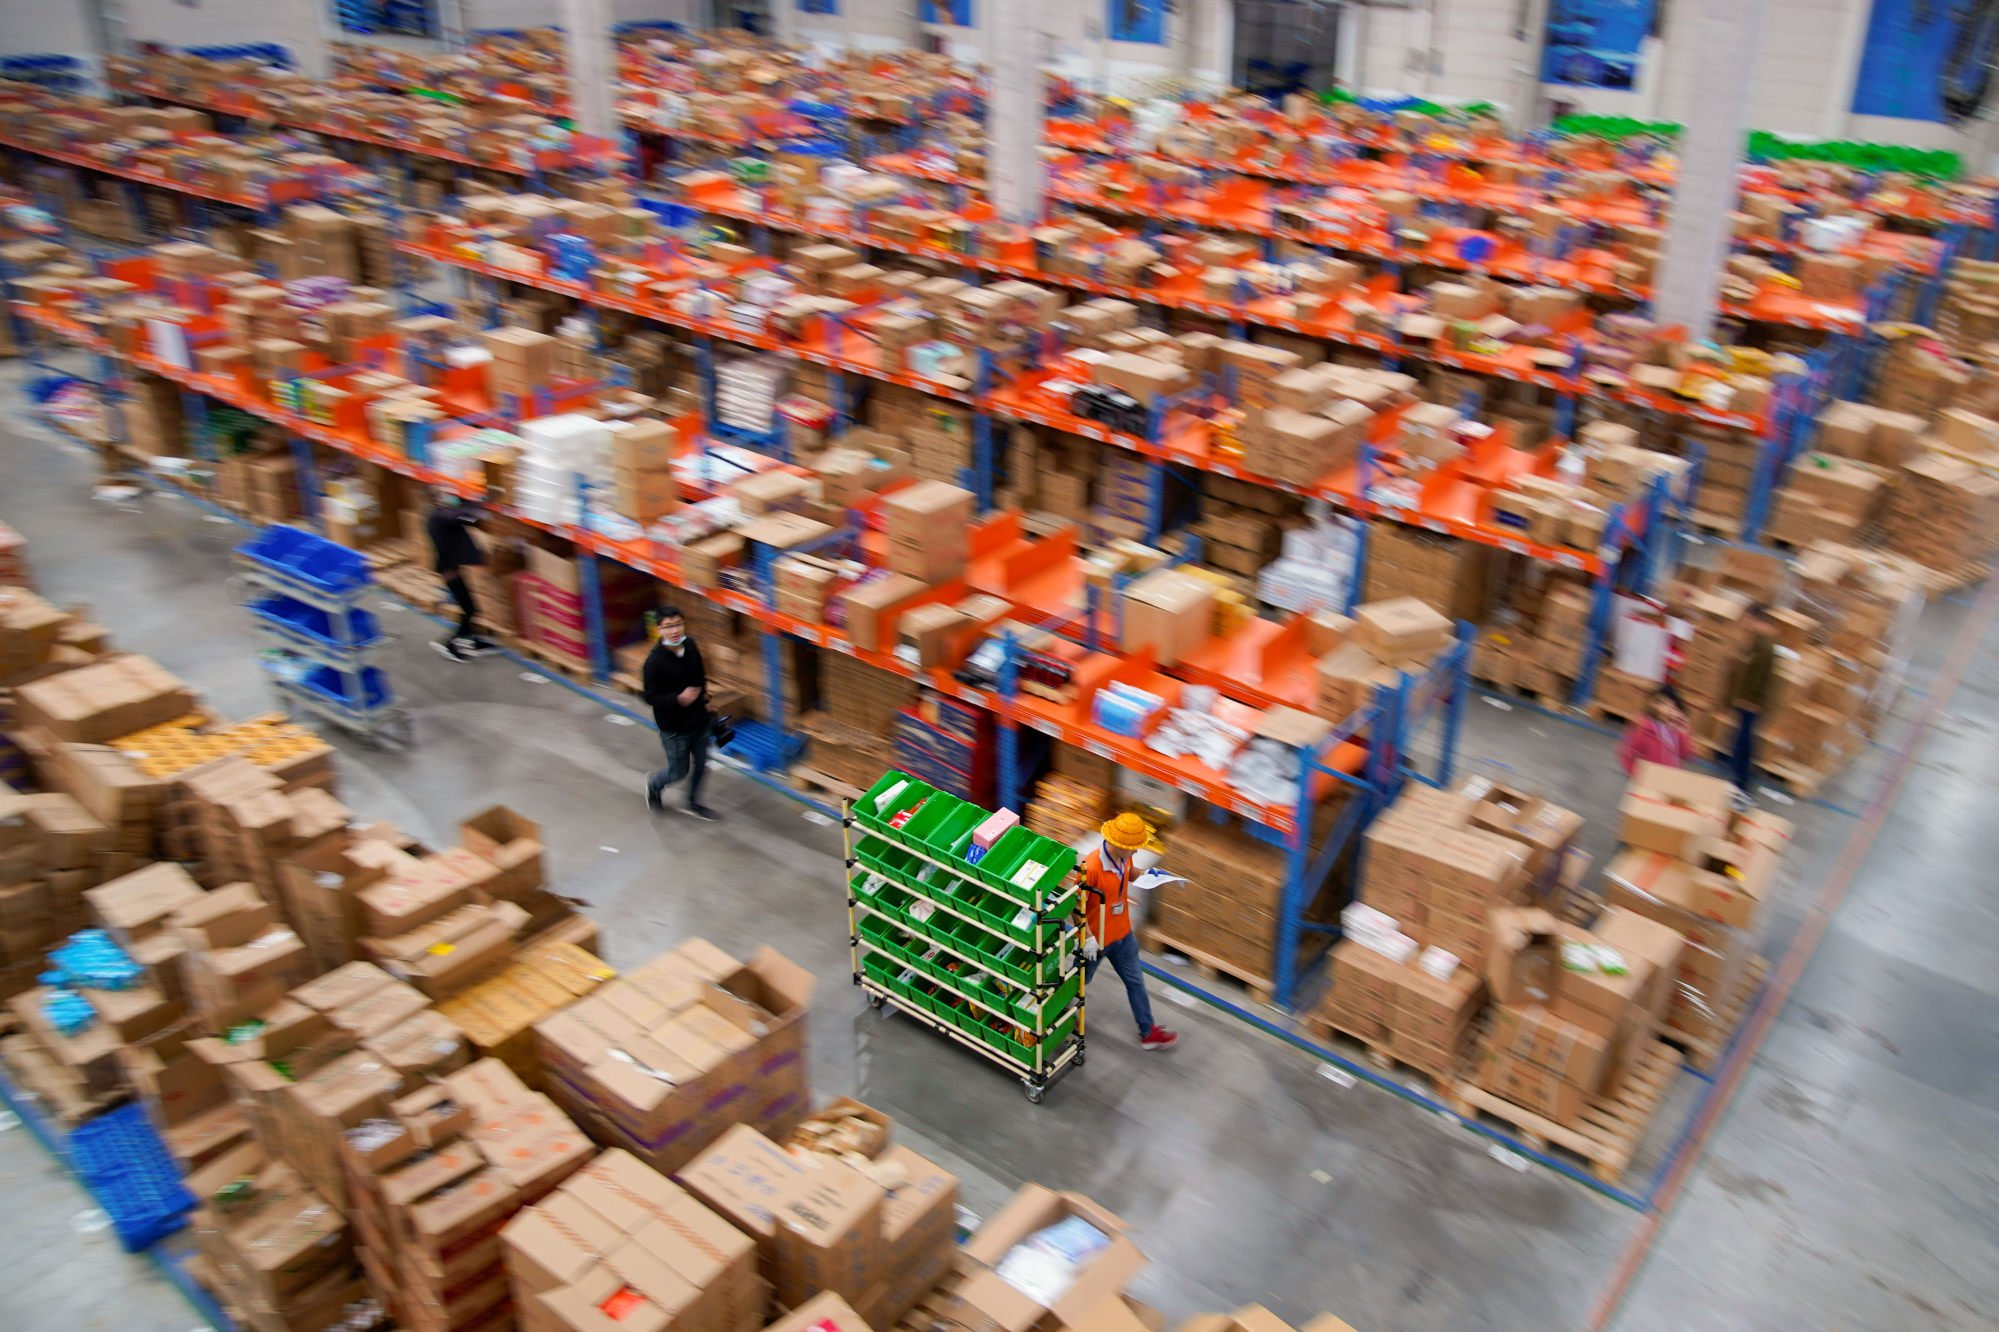 Employees work at a warehouse of Cainiao, Alibaba’s logistics unit, in Wuxi, Jiangsu province, China on October 26, 2020. Photo: Reuters